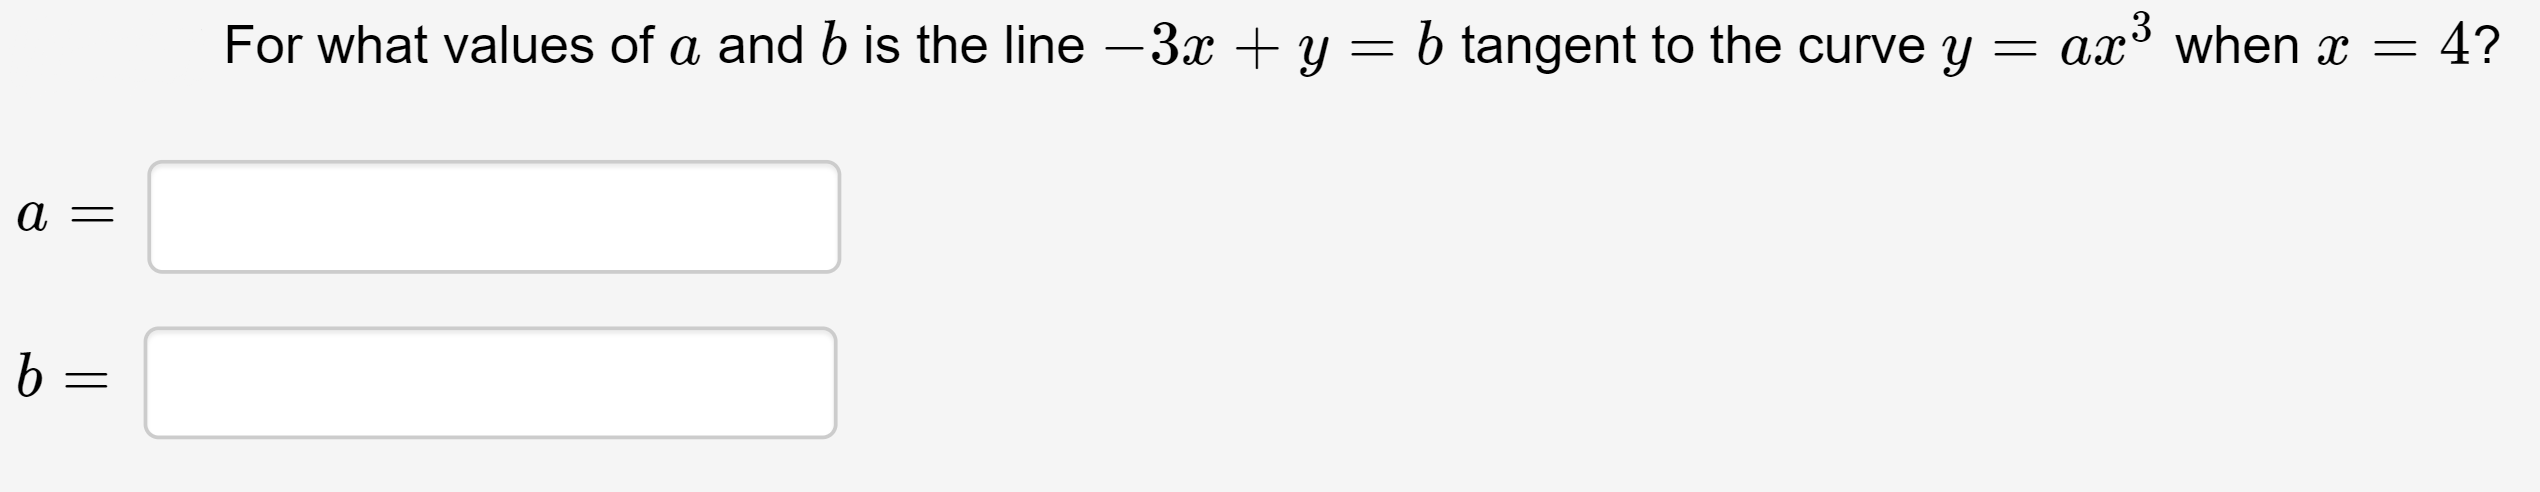 .3
ax when x=
For what values of a and b is the line -3x + y = b tangent to the curve y
4?
b
